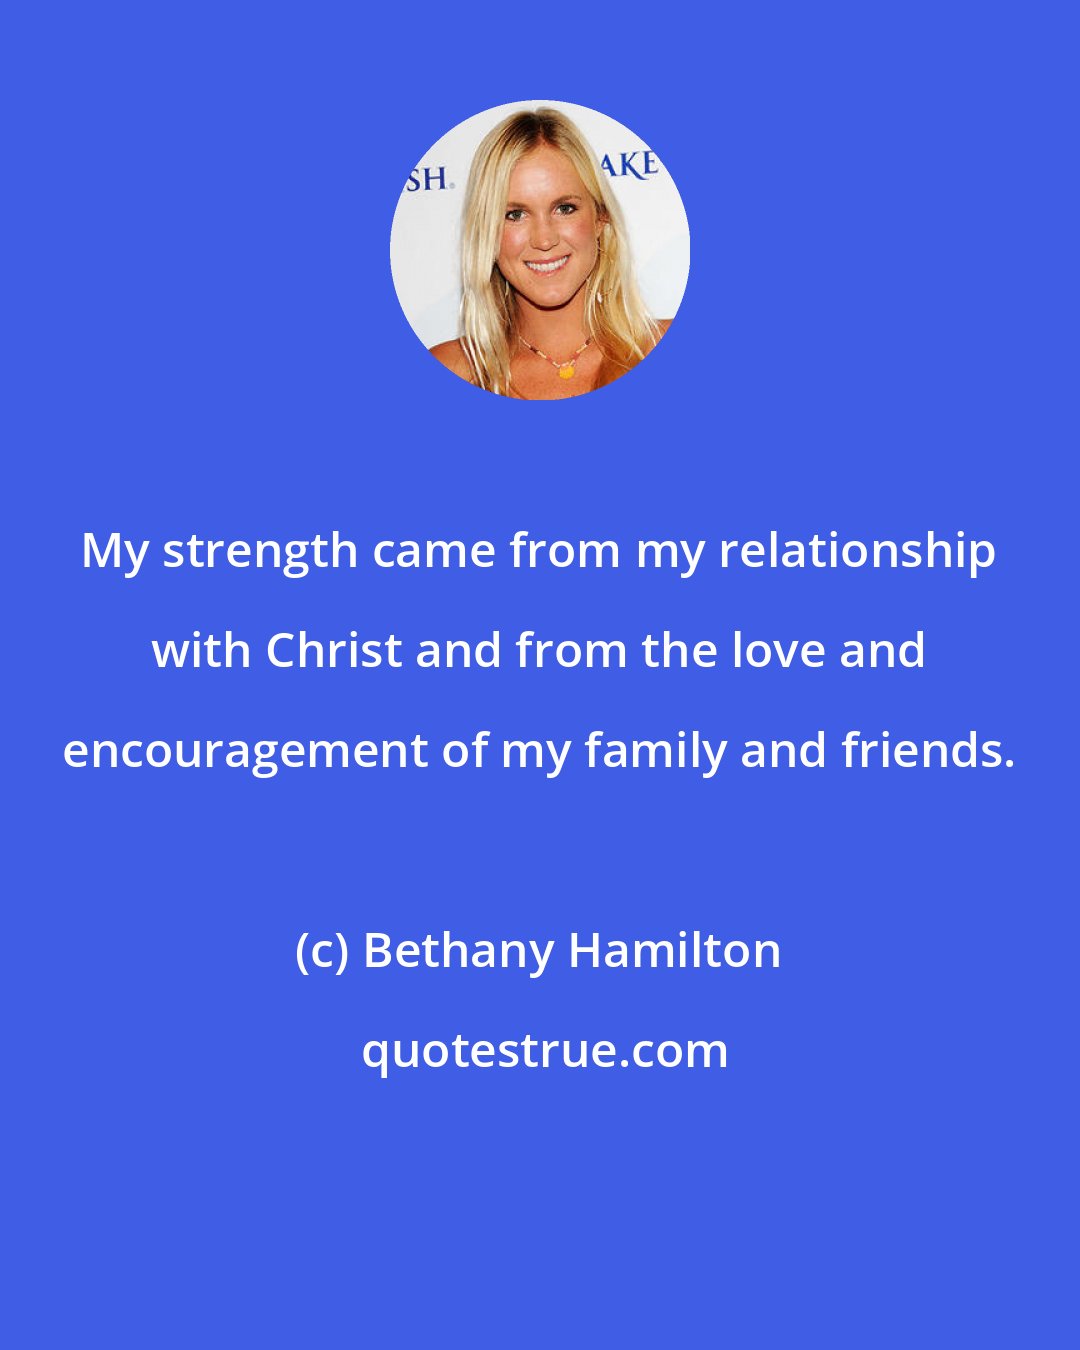 Bethany Hamilton: My strength came from my relationship with Christ and from the love and encouragement of my family and friends.